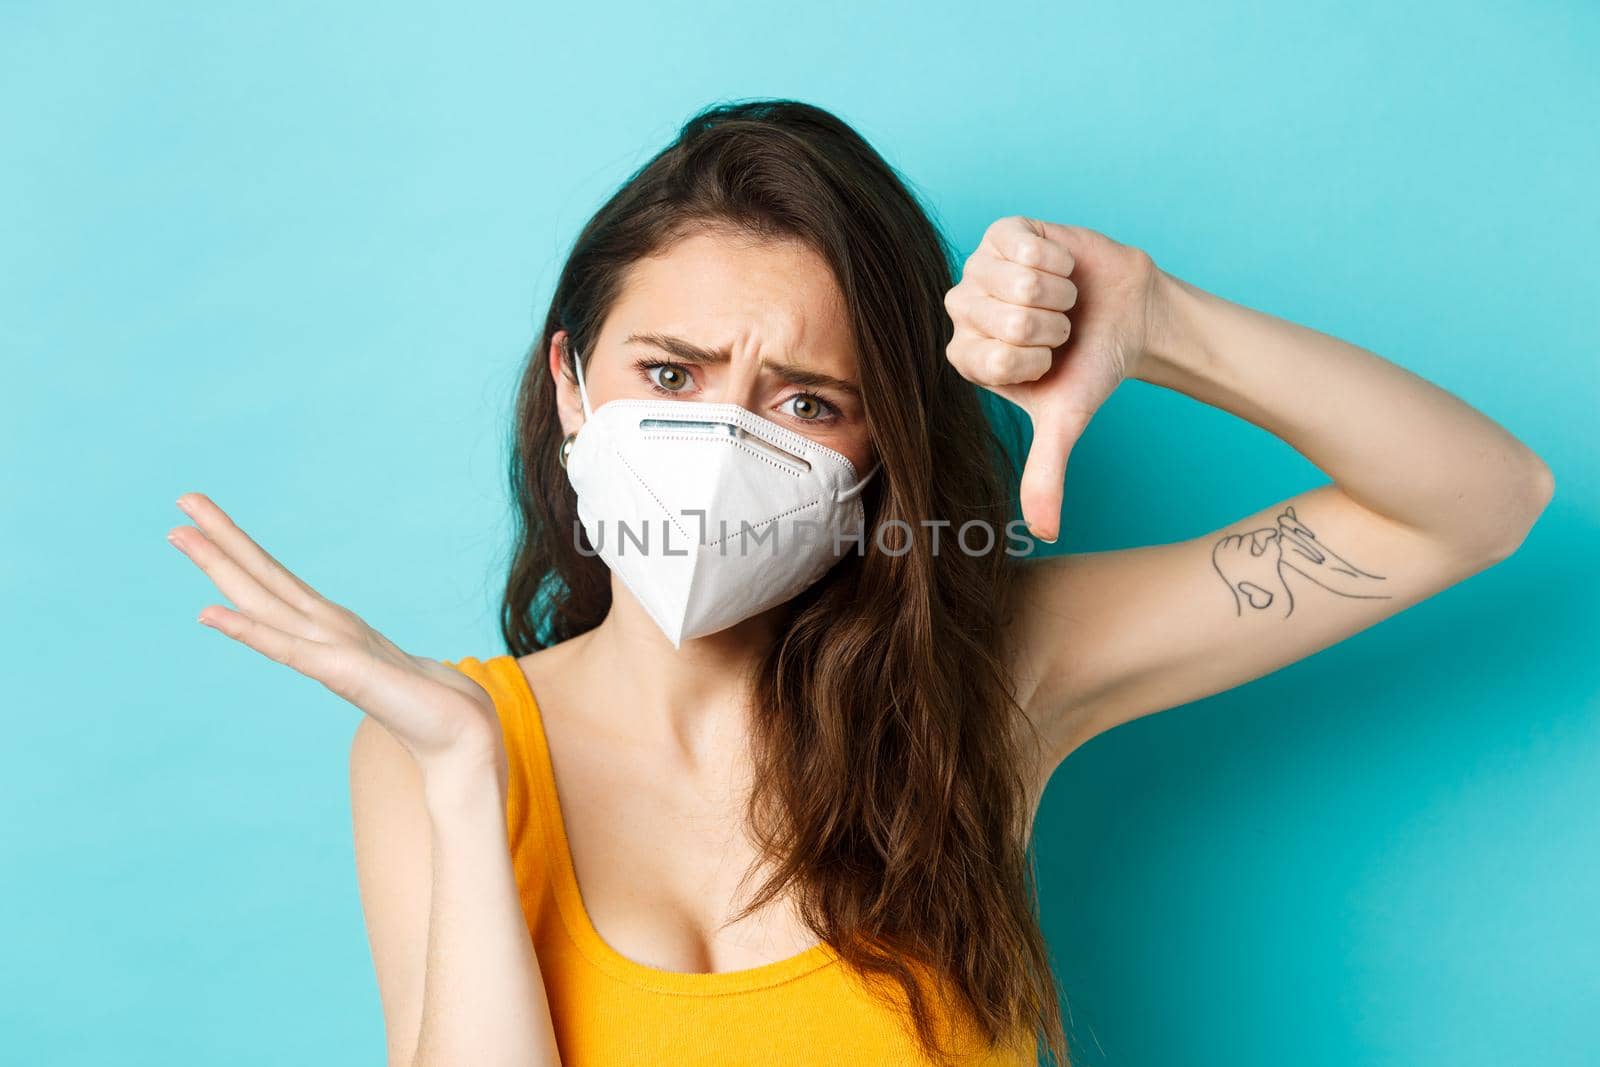 Corona, pandemic and healthcare concept. Frustrated young woman showing thumb down and look confused, dont understand why, wearing face mask, blue background.